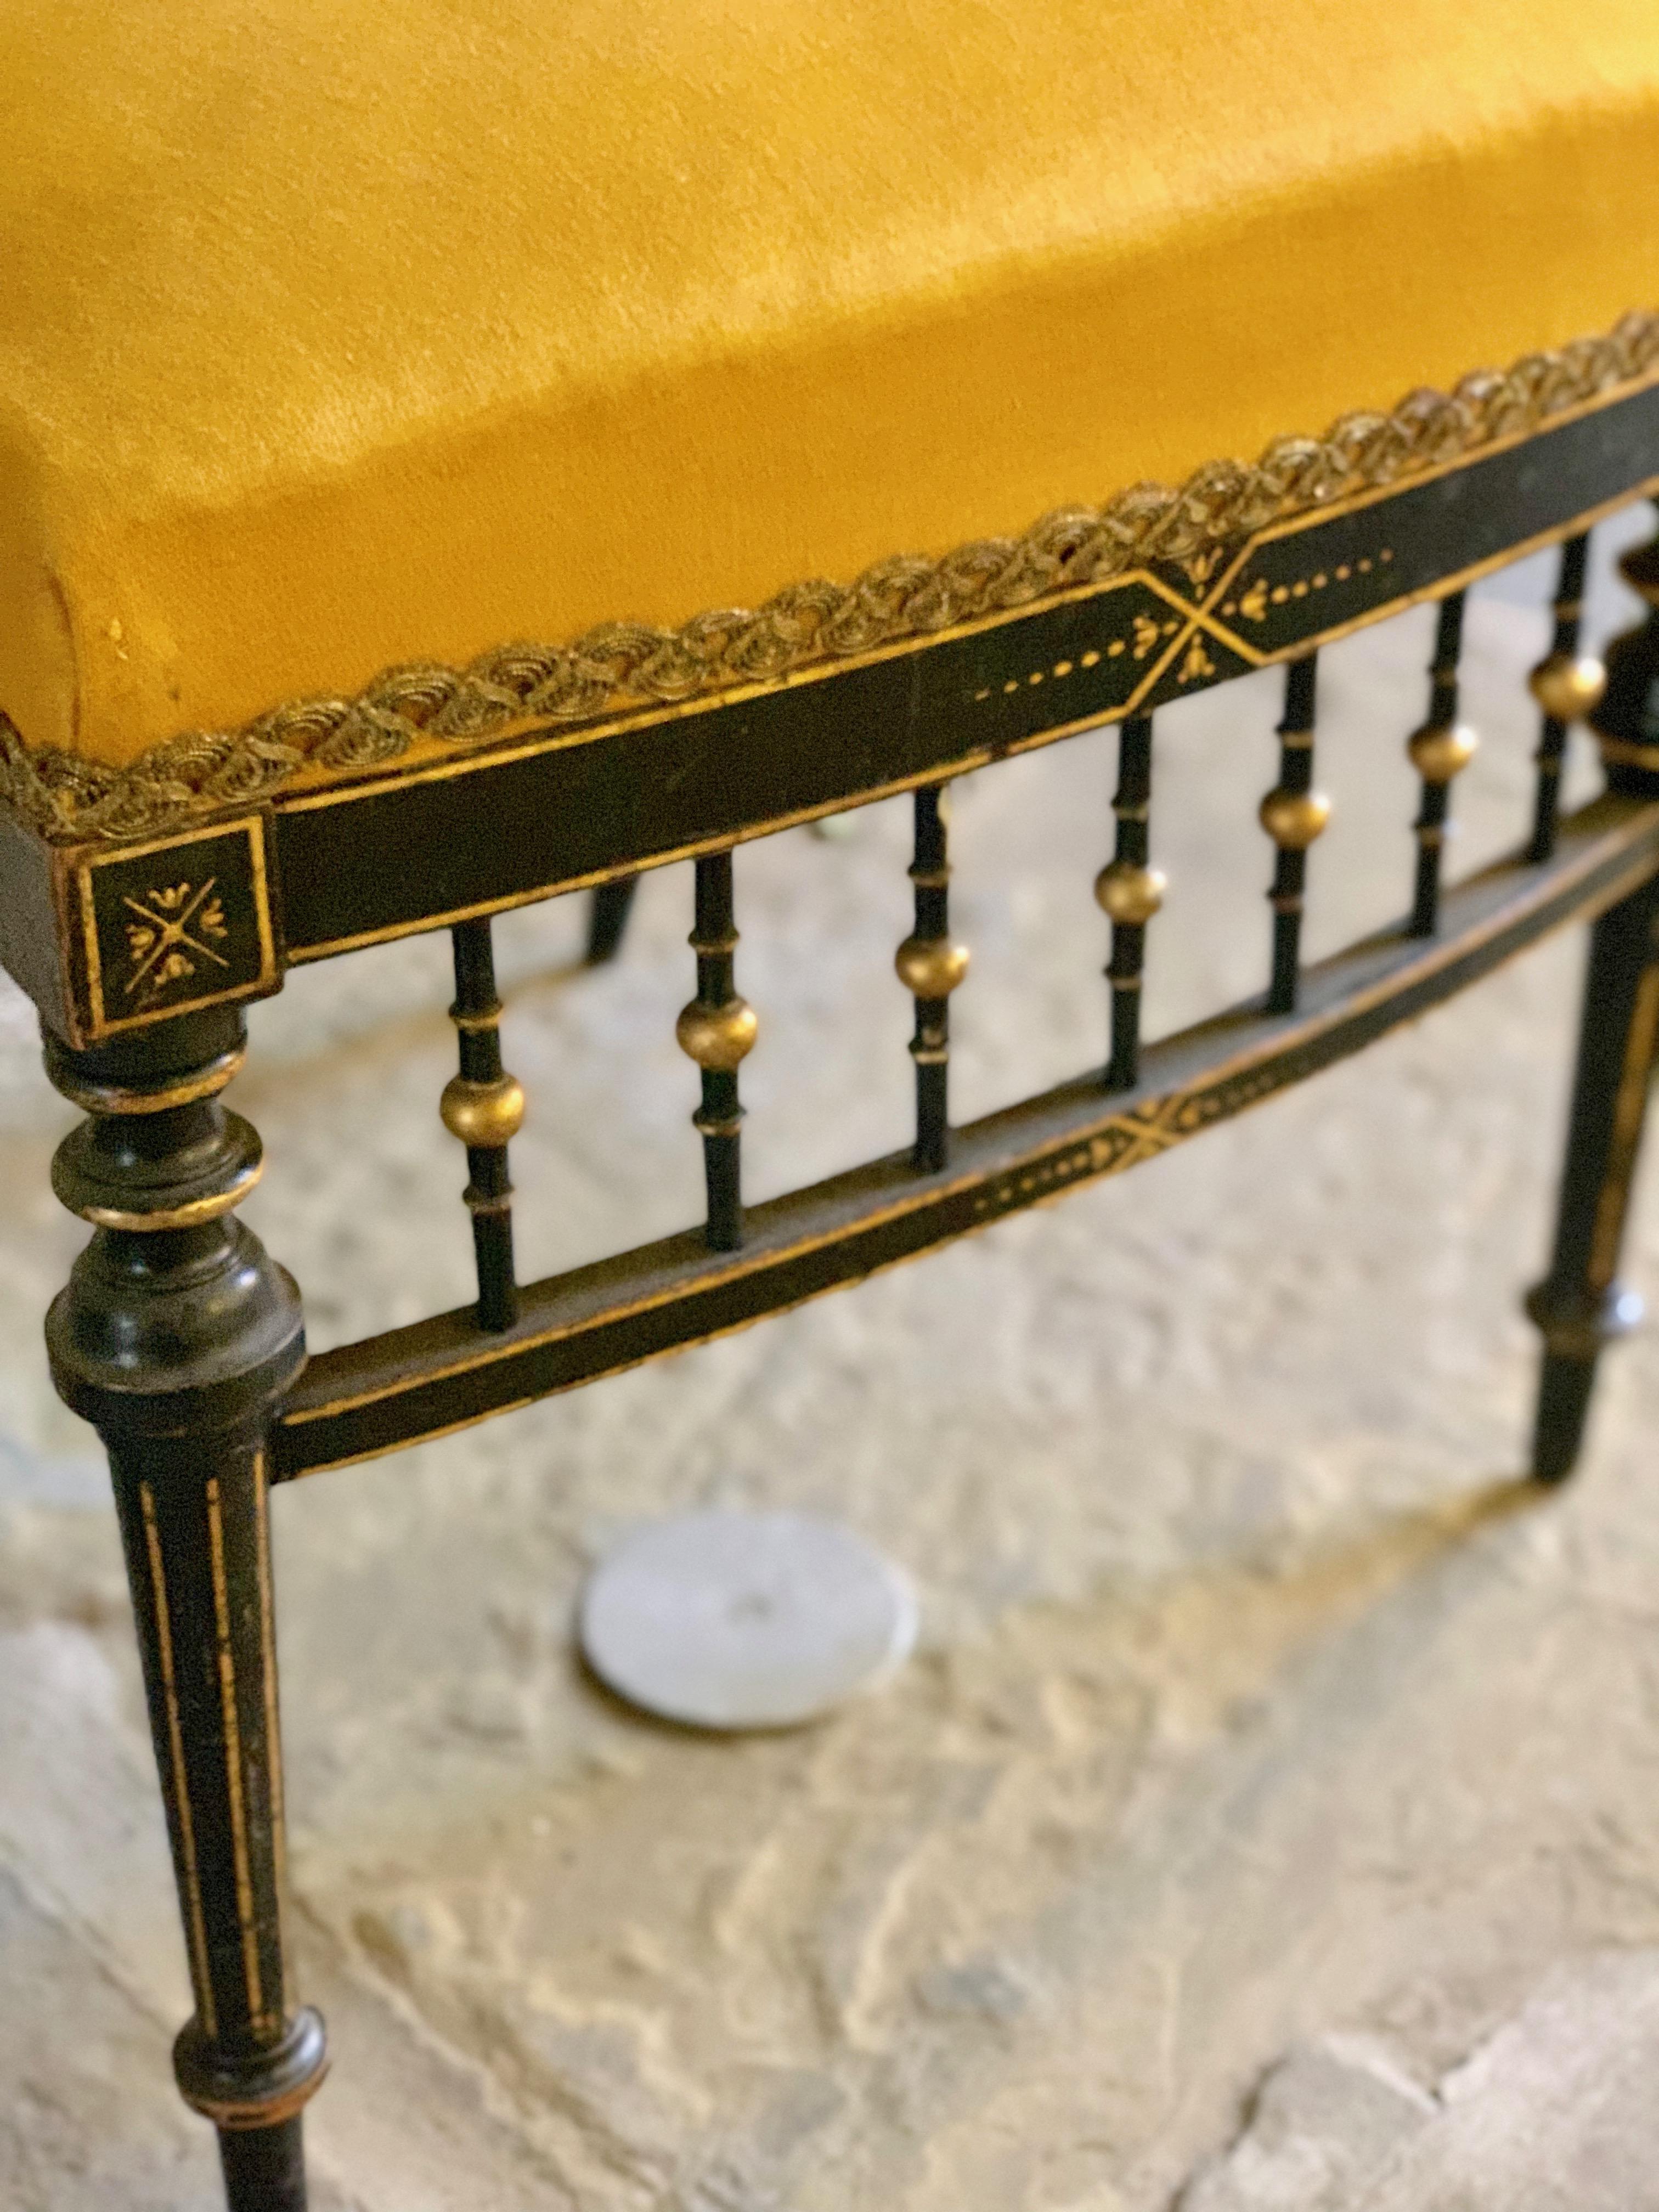 Early 20th Century French Chair with Gilt Detailing (Französisch)